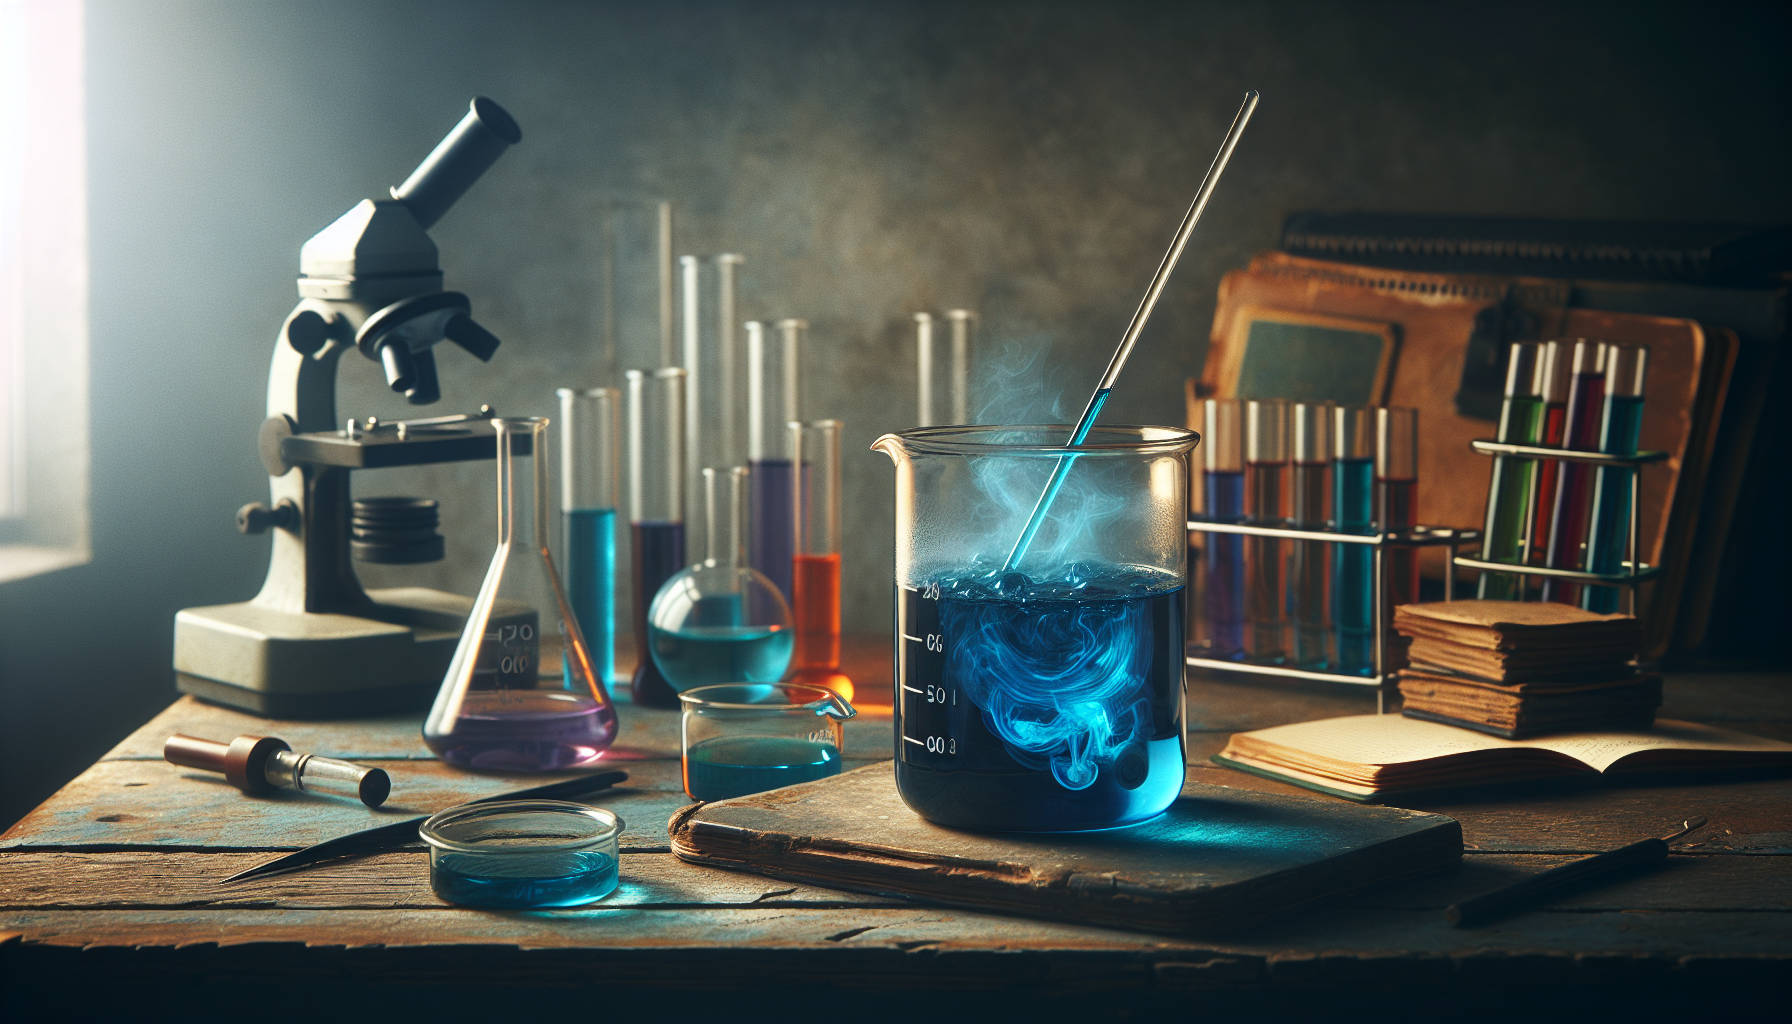 A laboratory beaker filled with a colorful liquid being stirred with a glass rod